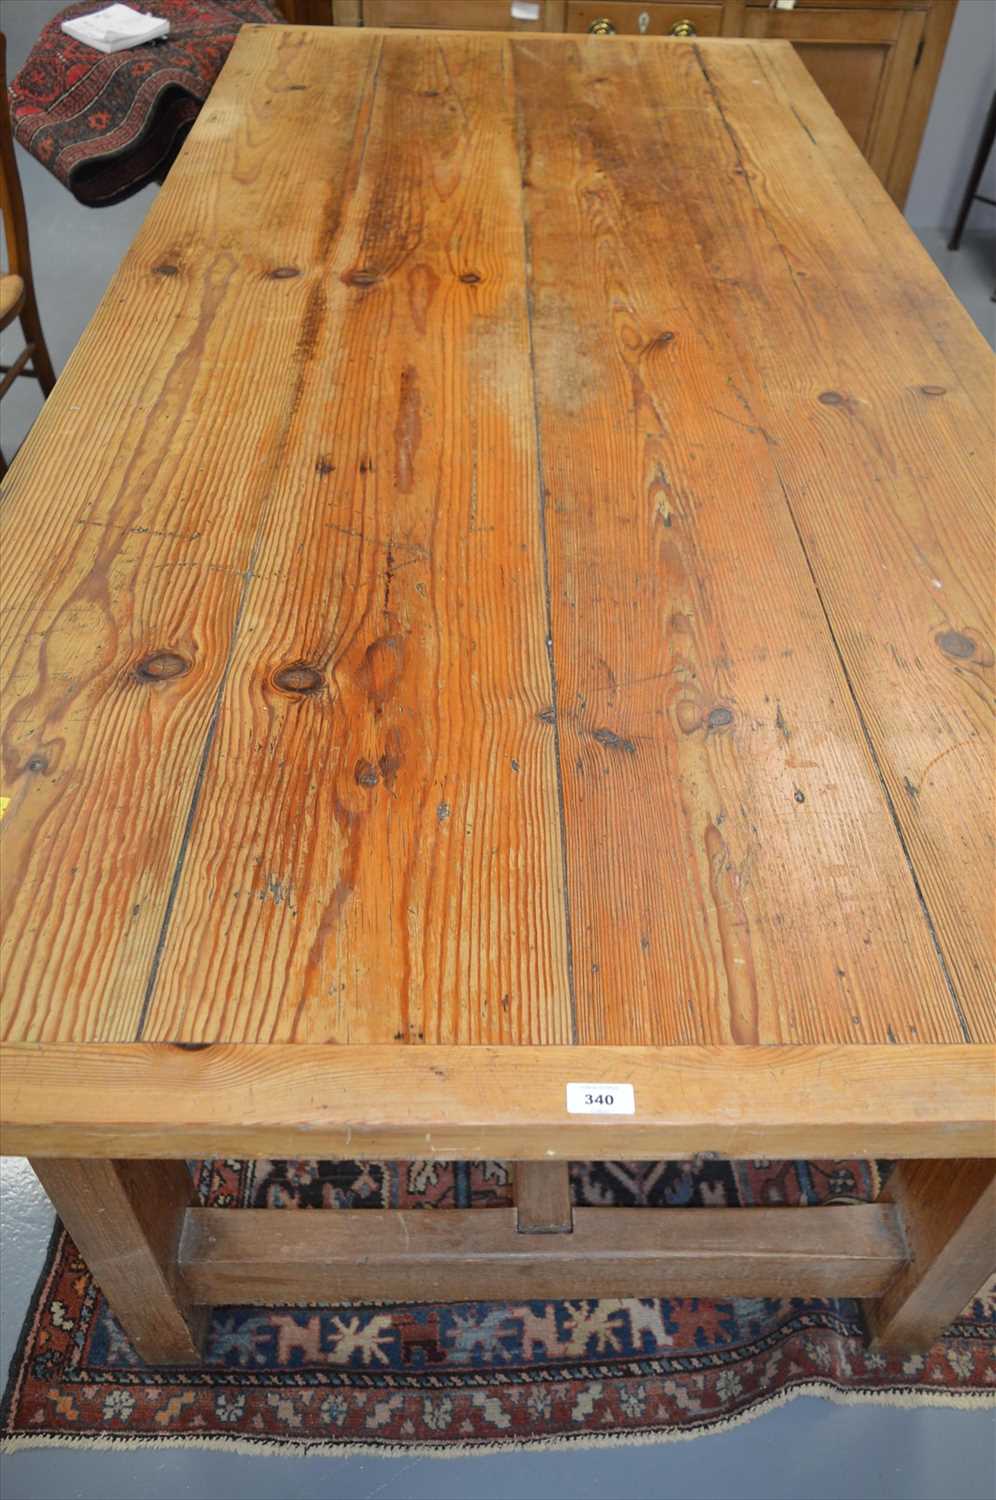 Lot 340 - Dining table.